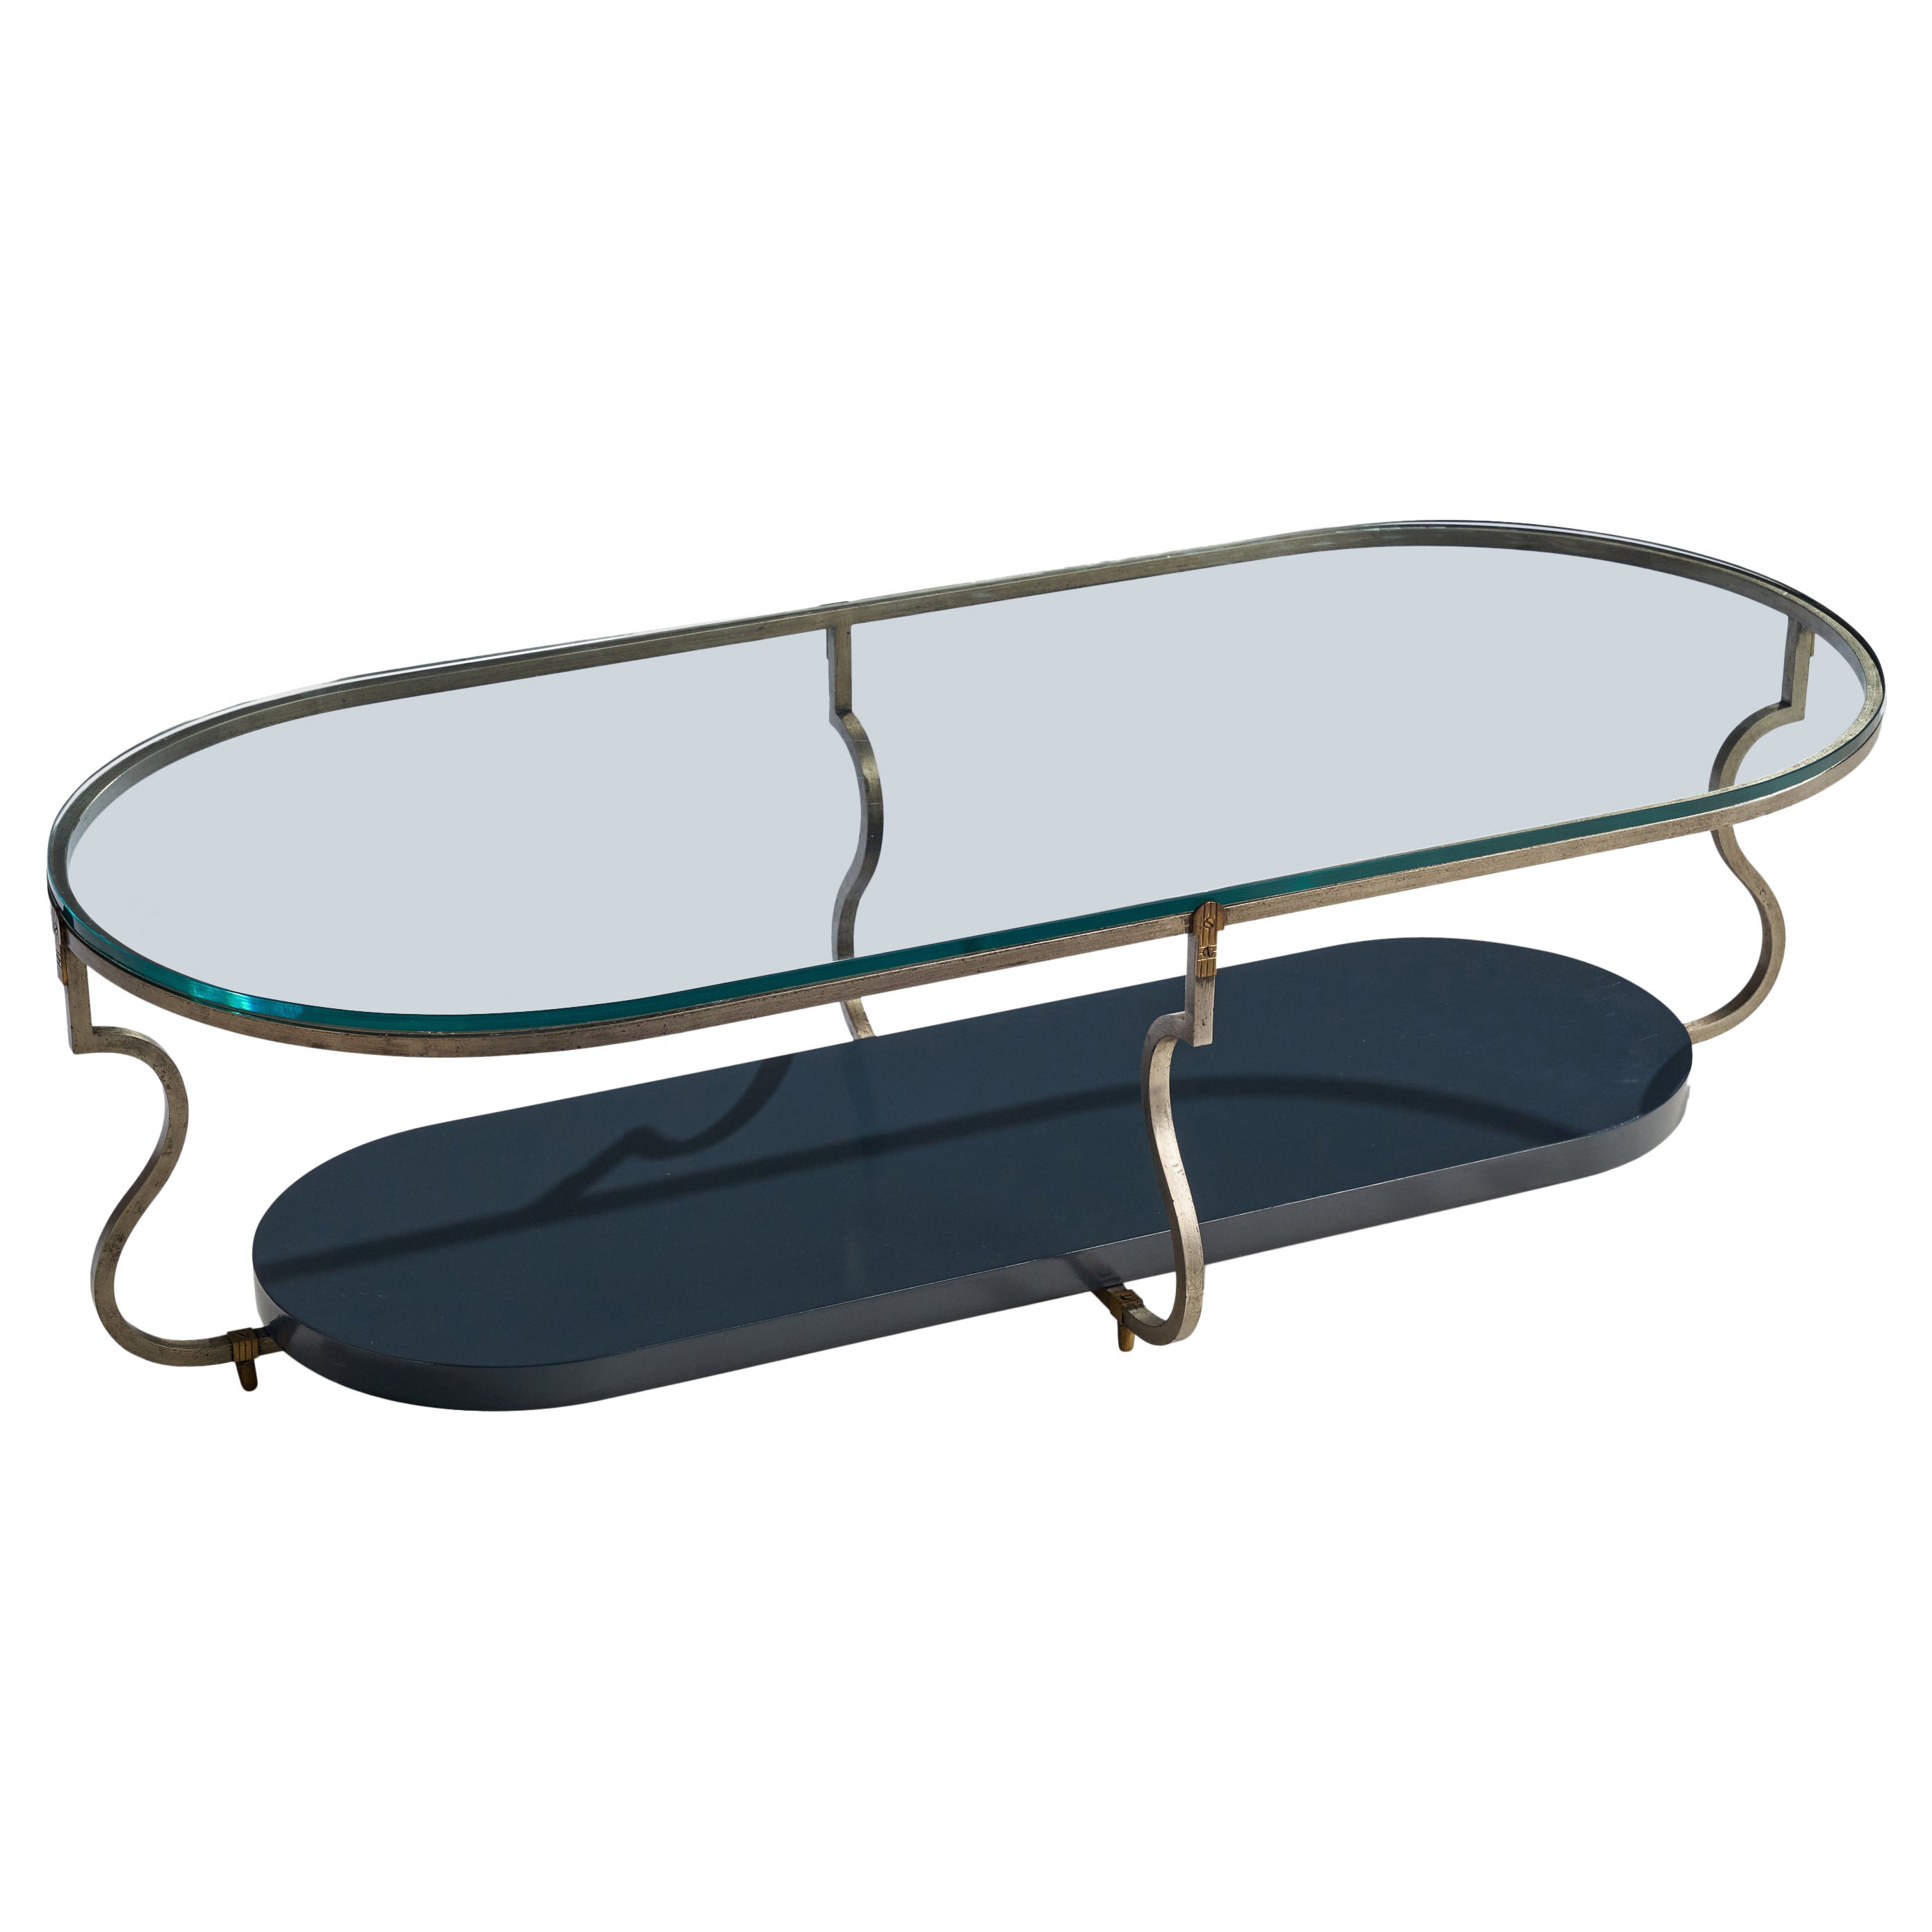 Tommi Parzinger, Coffee Table, Steel, Glass, Wood, USA, 1950s For Sale